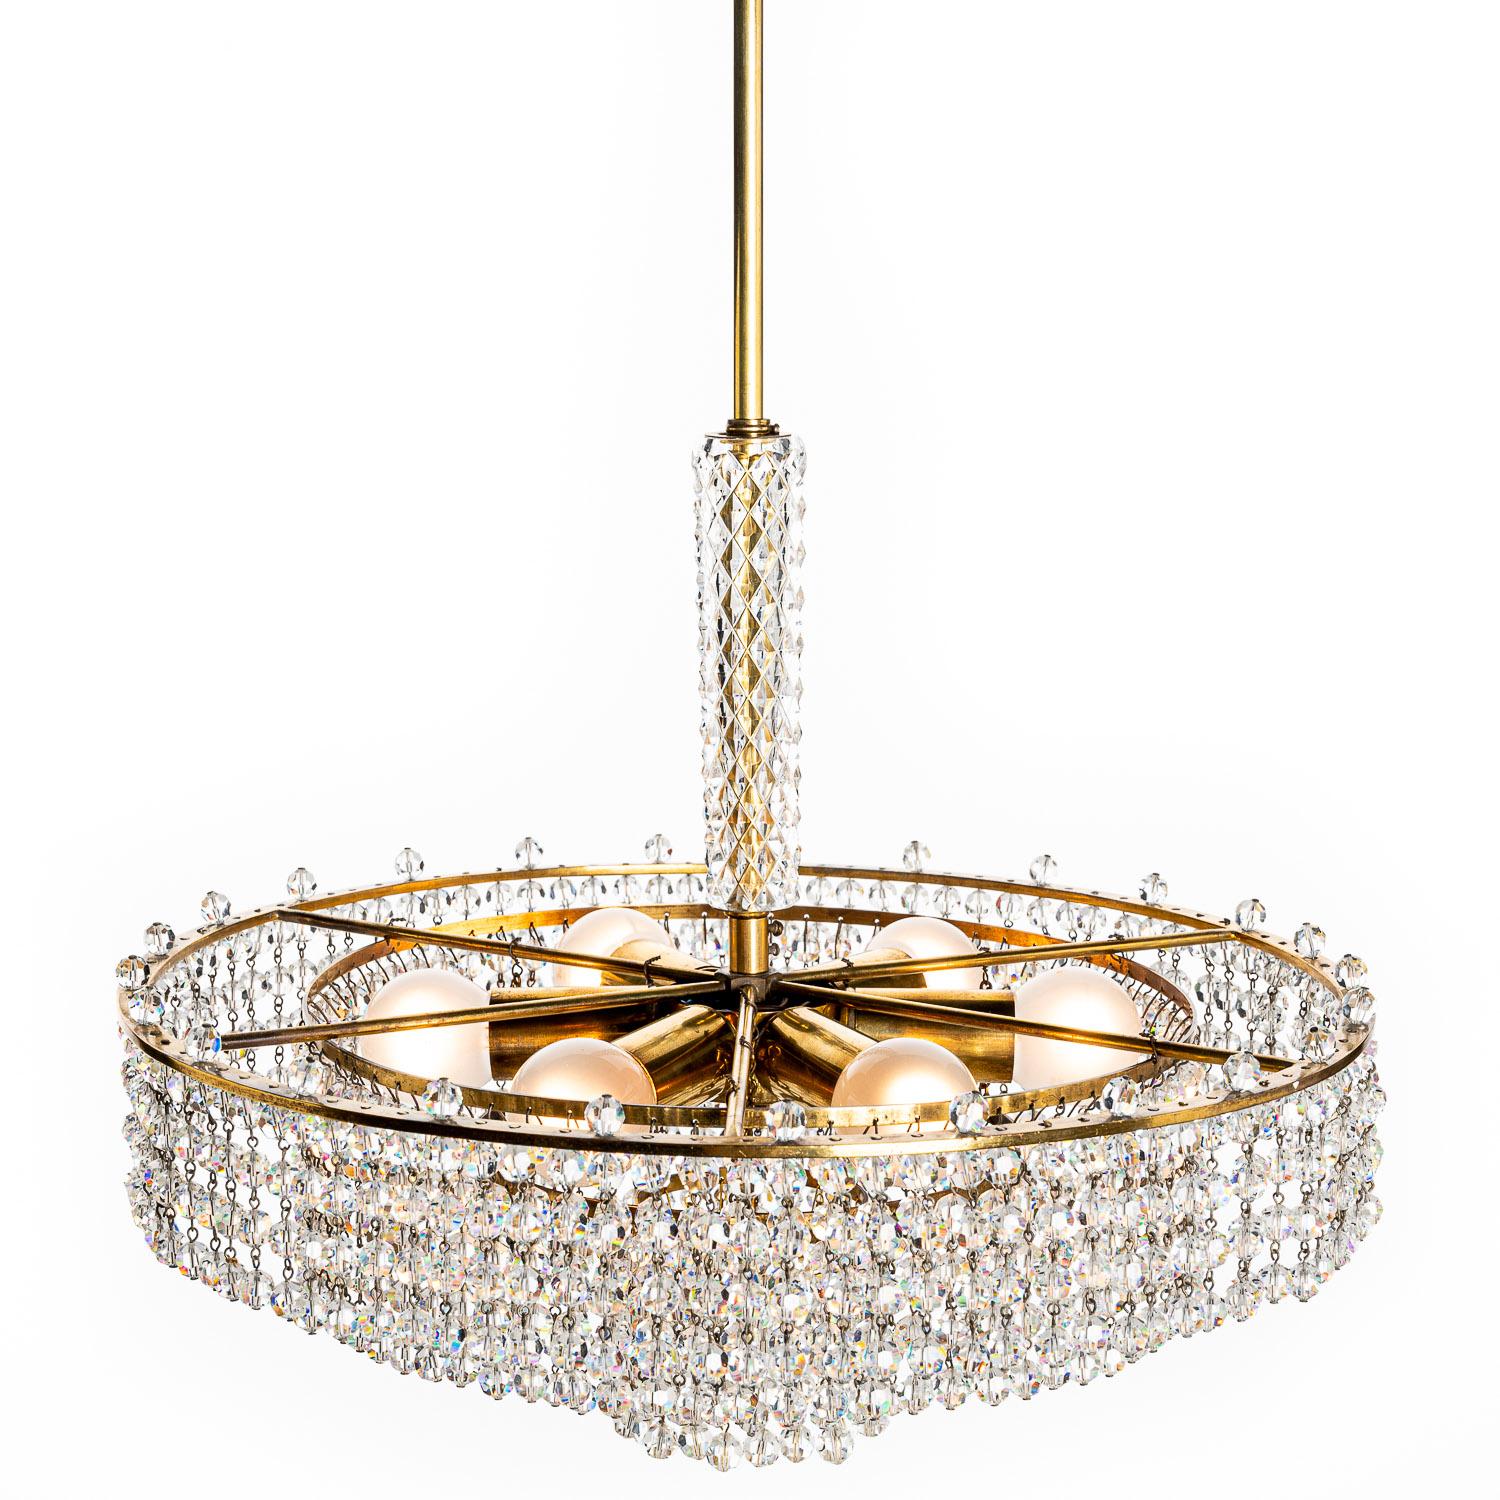 20th Century 1950s Faceted Crystal Glass and Brass Chandelier attributed to Lobmeyr For Sale